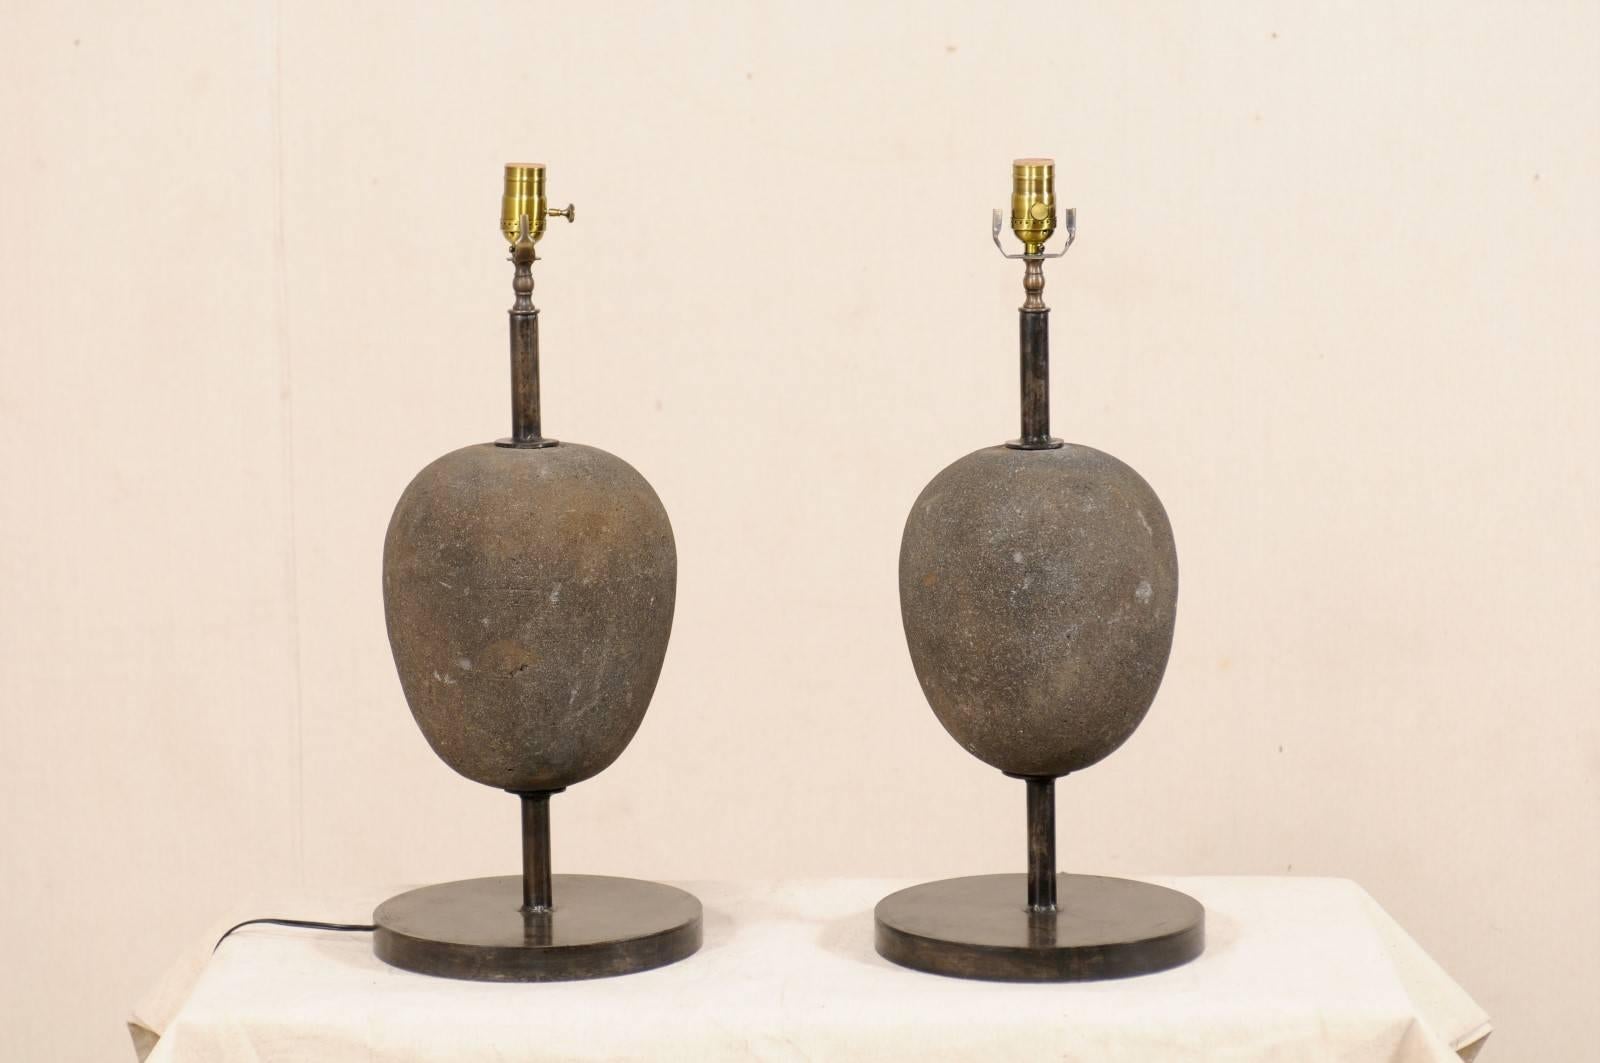 A pair of vintage European stone ovoid or egg-shaped table lamps. This pair of European table lamps have been custom fashioned from nicely carved egg-shaped stones which are mounted onto round-shaped iron bases. The stones have a